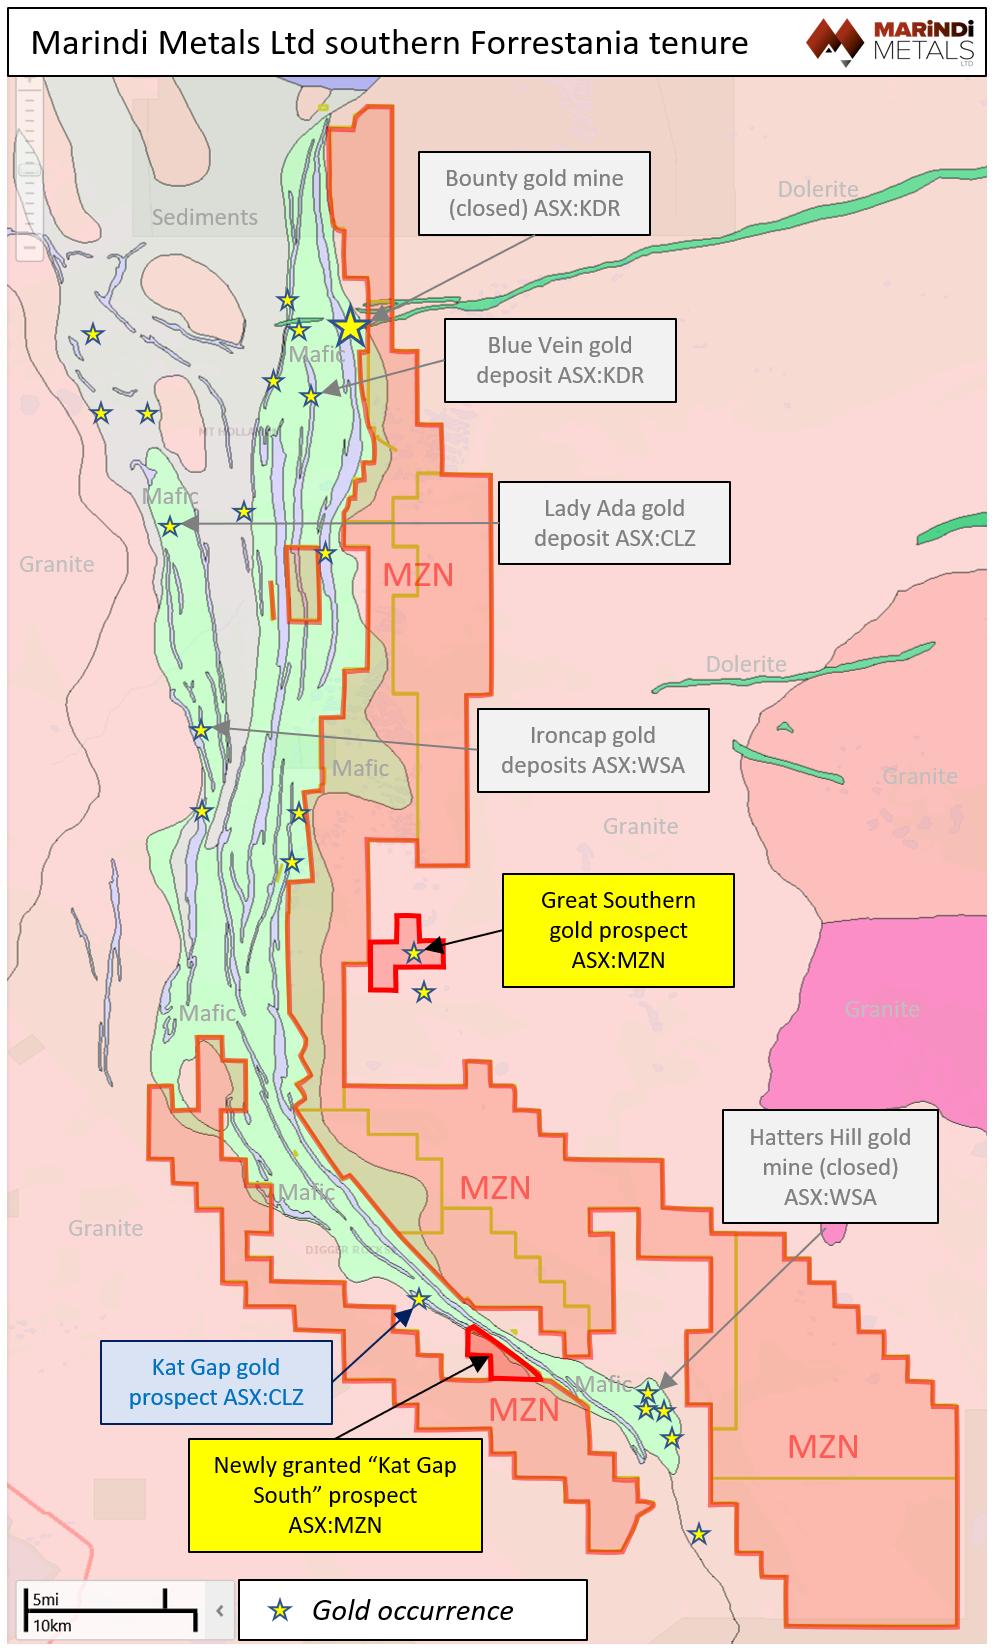 Southern Forrestania Gold Project Large strategic land-holding in a major greenstone belt with proven gold endowment Greenstone belts proven host to major gold deposits around the world and